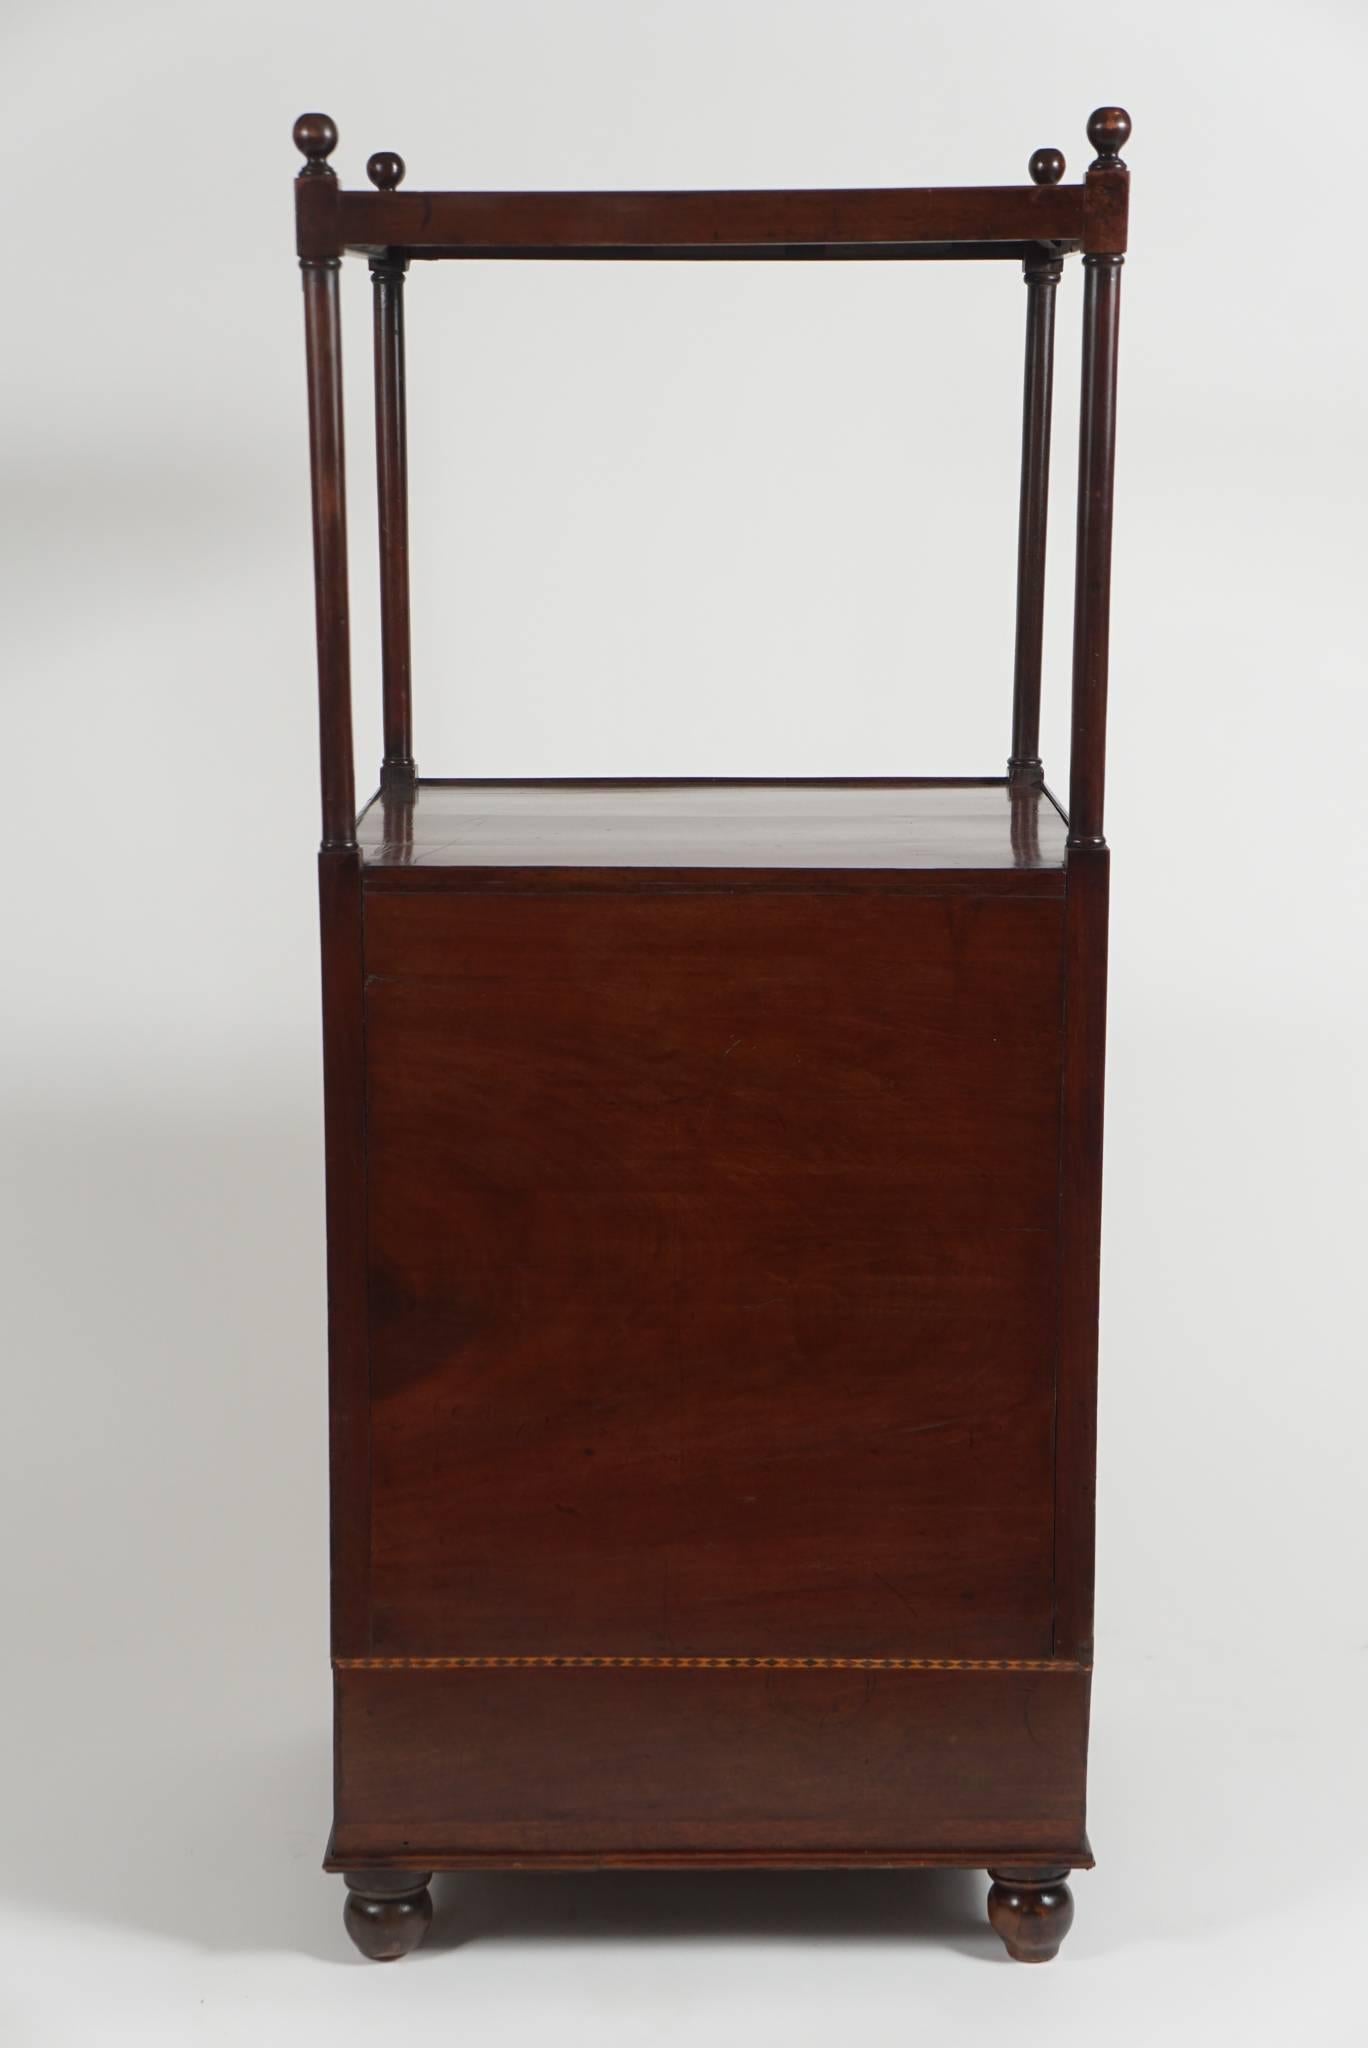 Leather English Regency Period Mahogany Étagère or Library Stand, circa 1815 For Sale